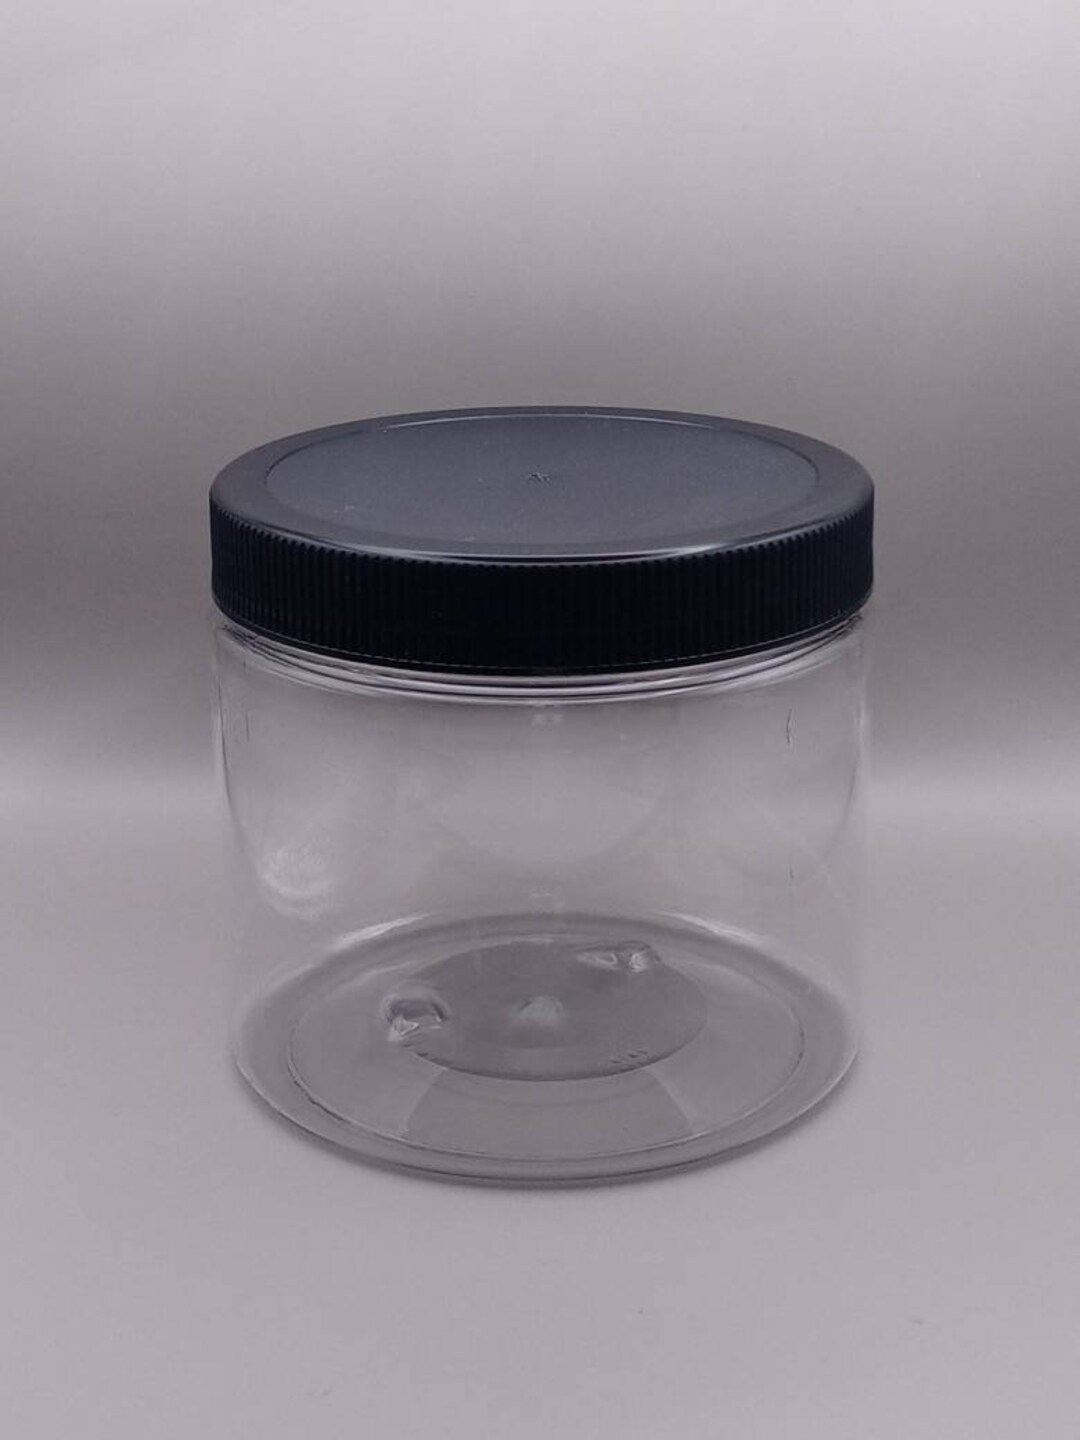 16 oz Clear PET Jars w/ White Ribbed Plastic Unlined Caps